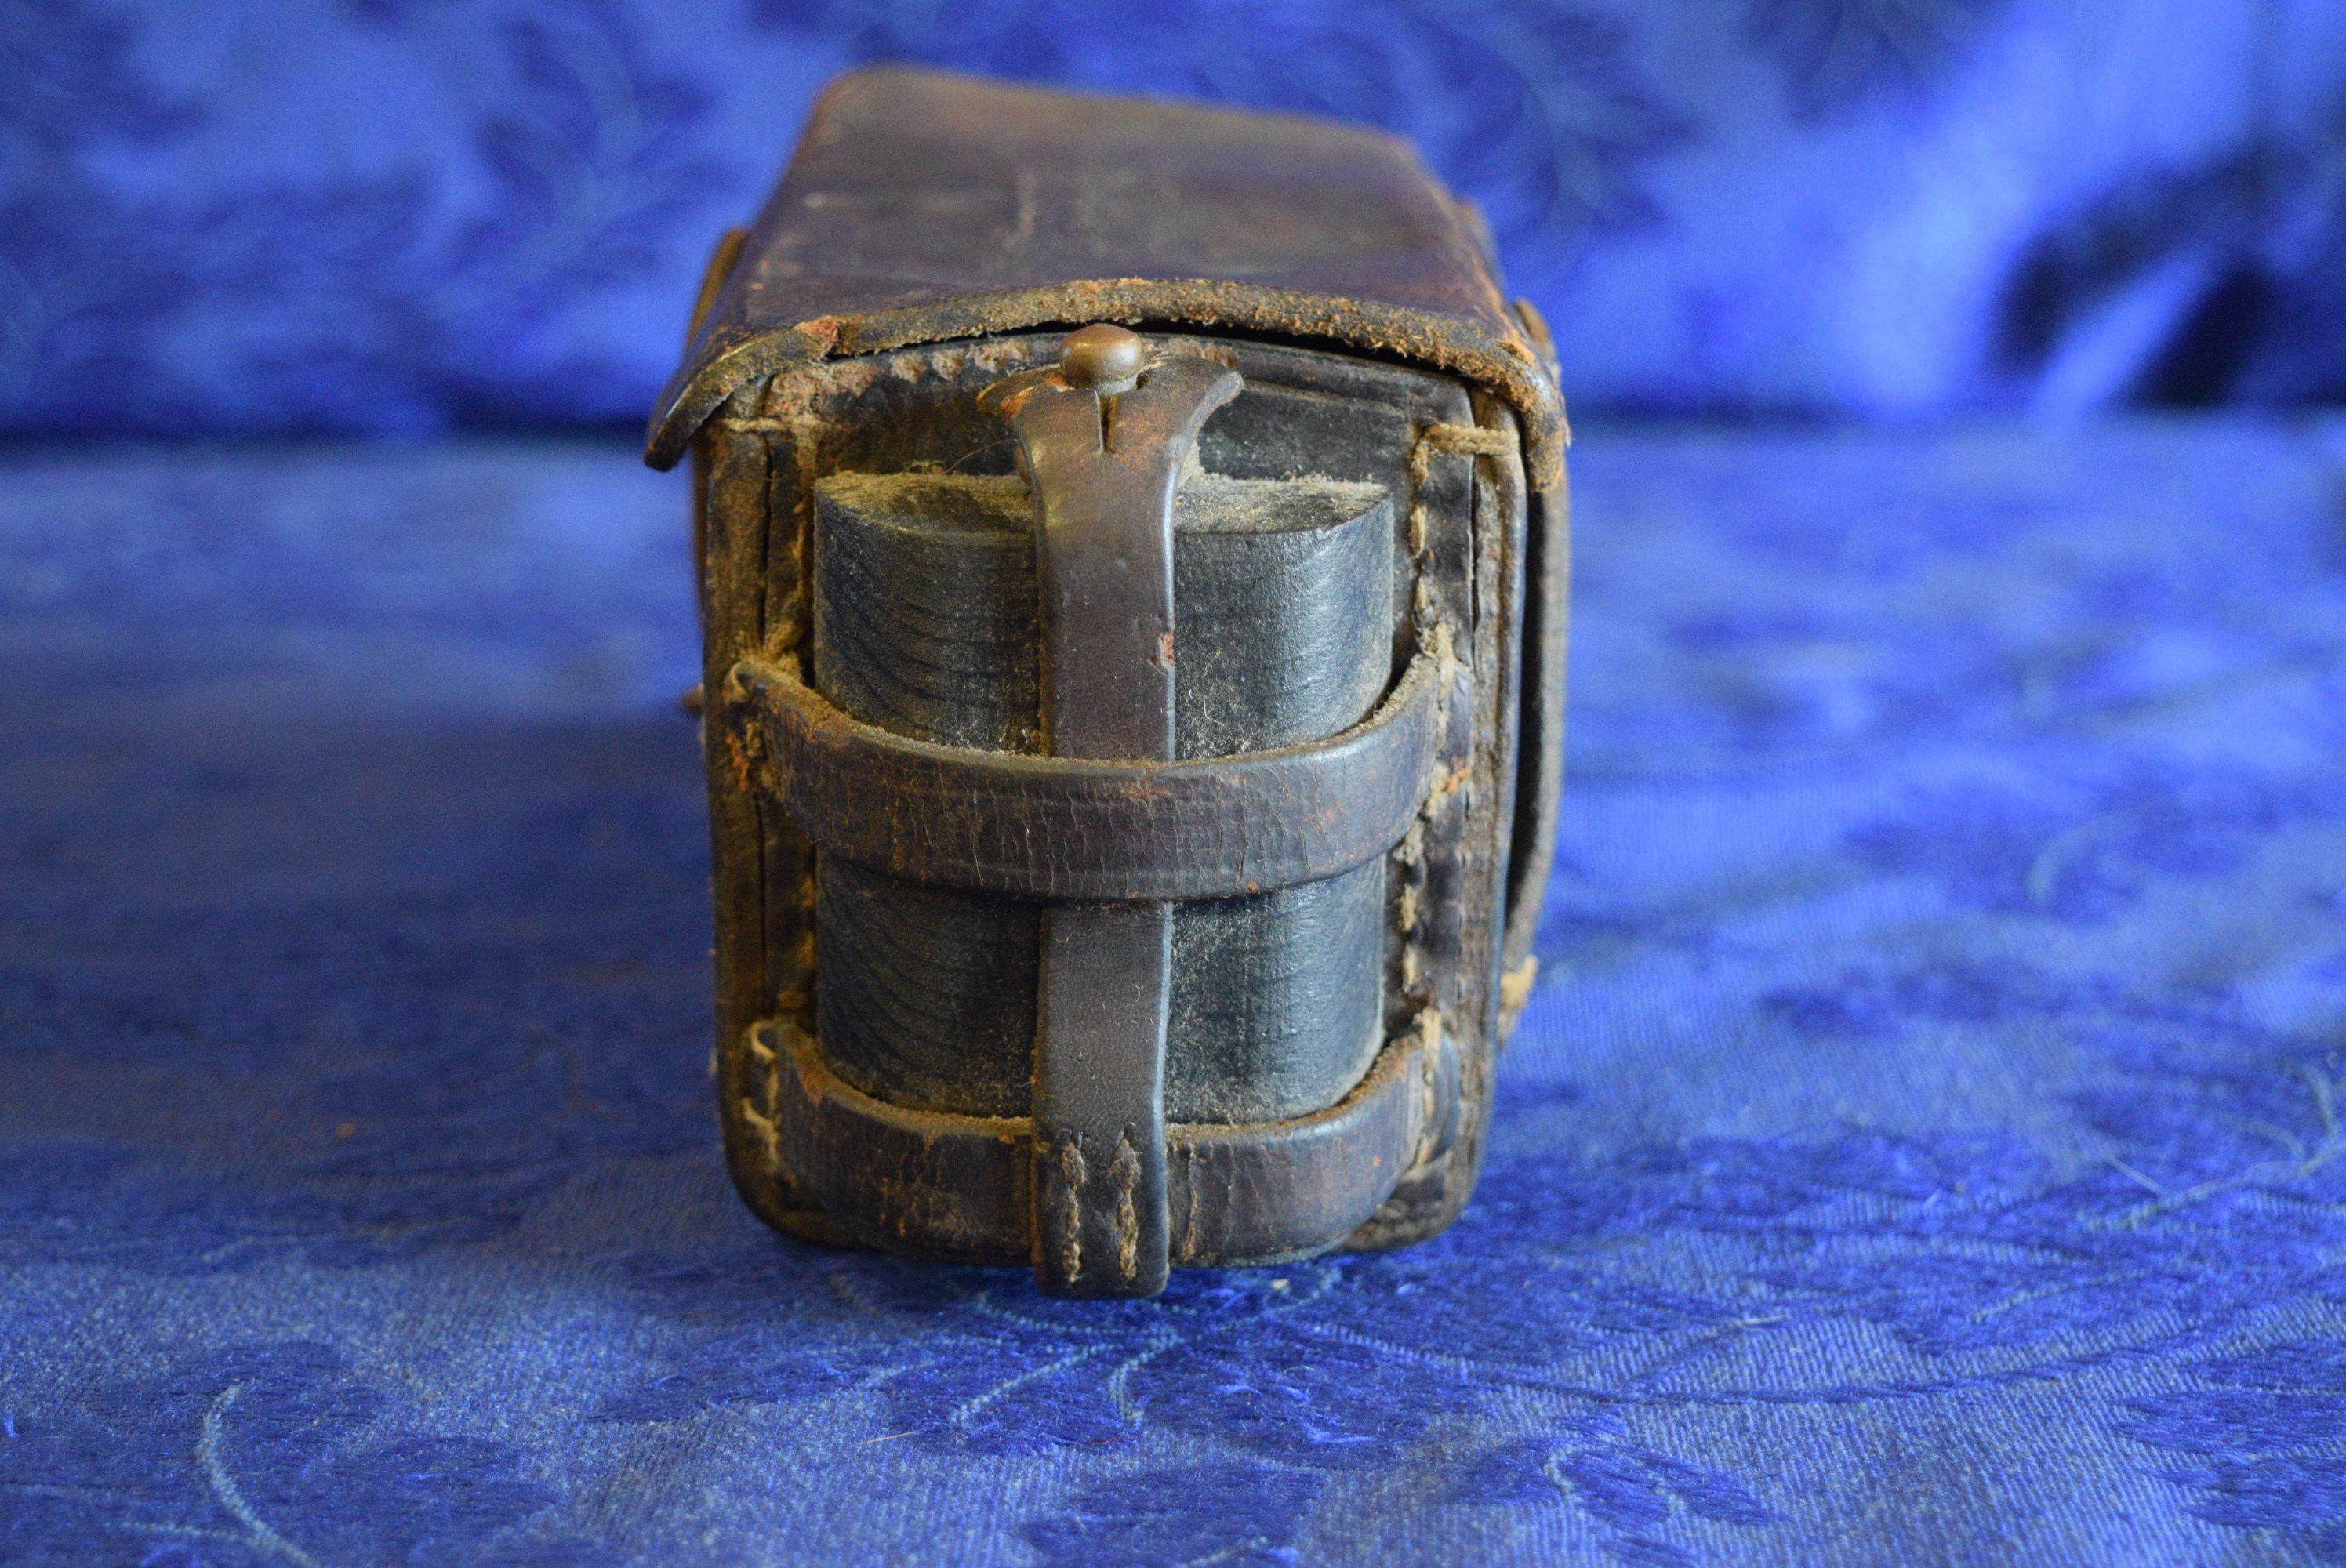 TYPE 30 REAR AMMO POUCH WITH OILER!